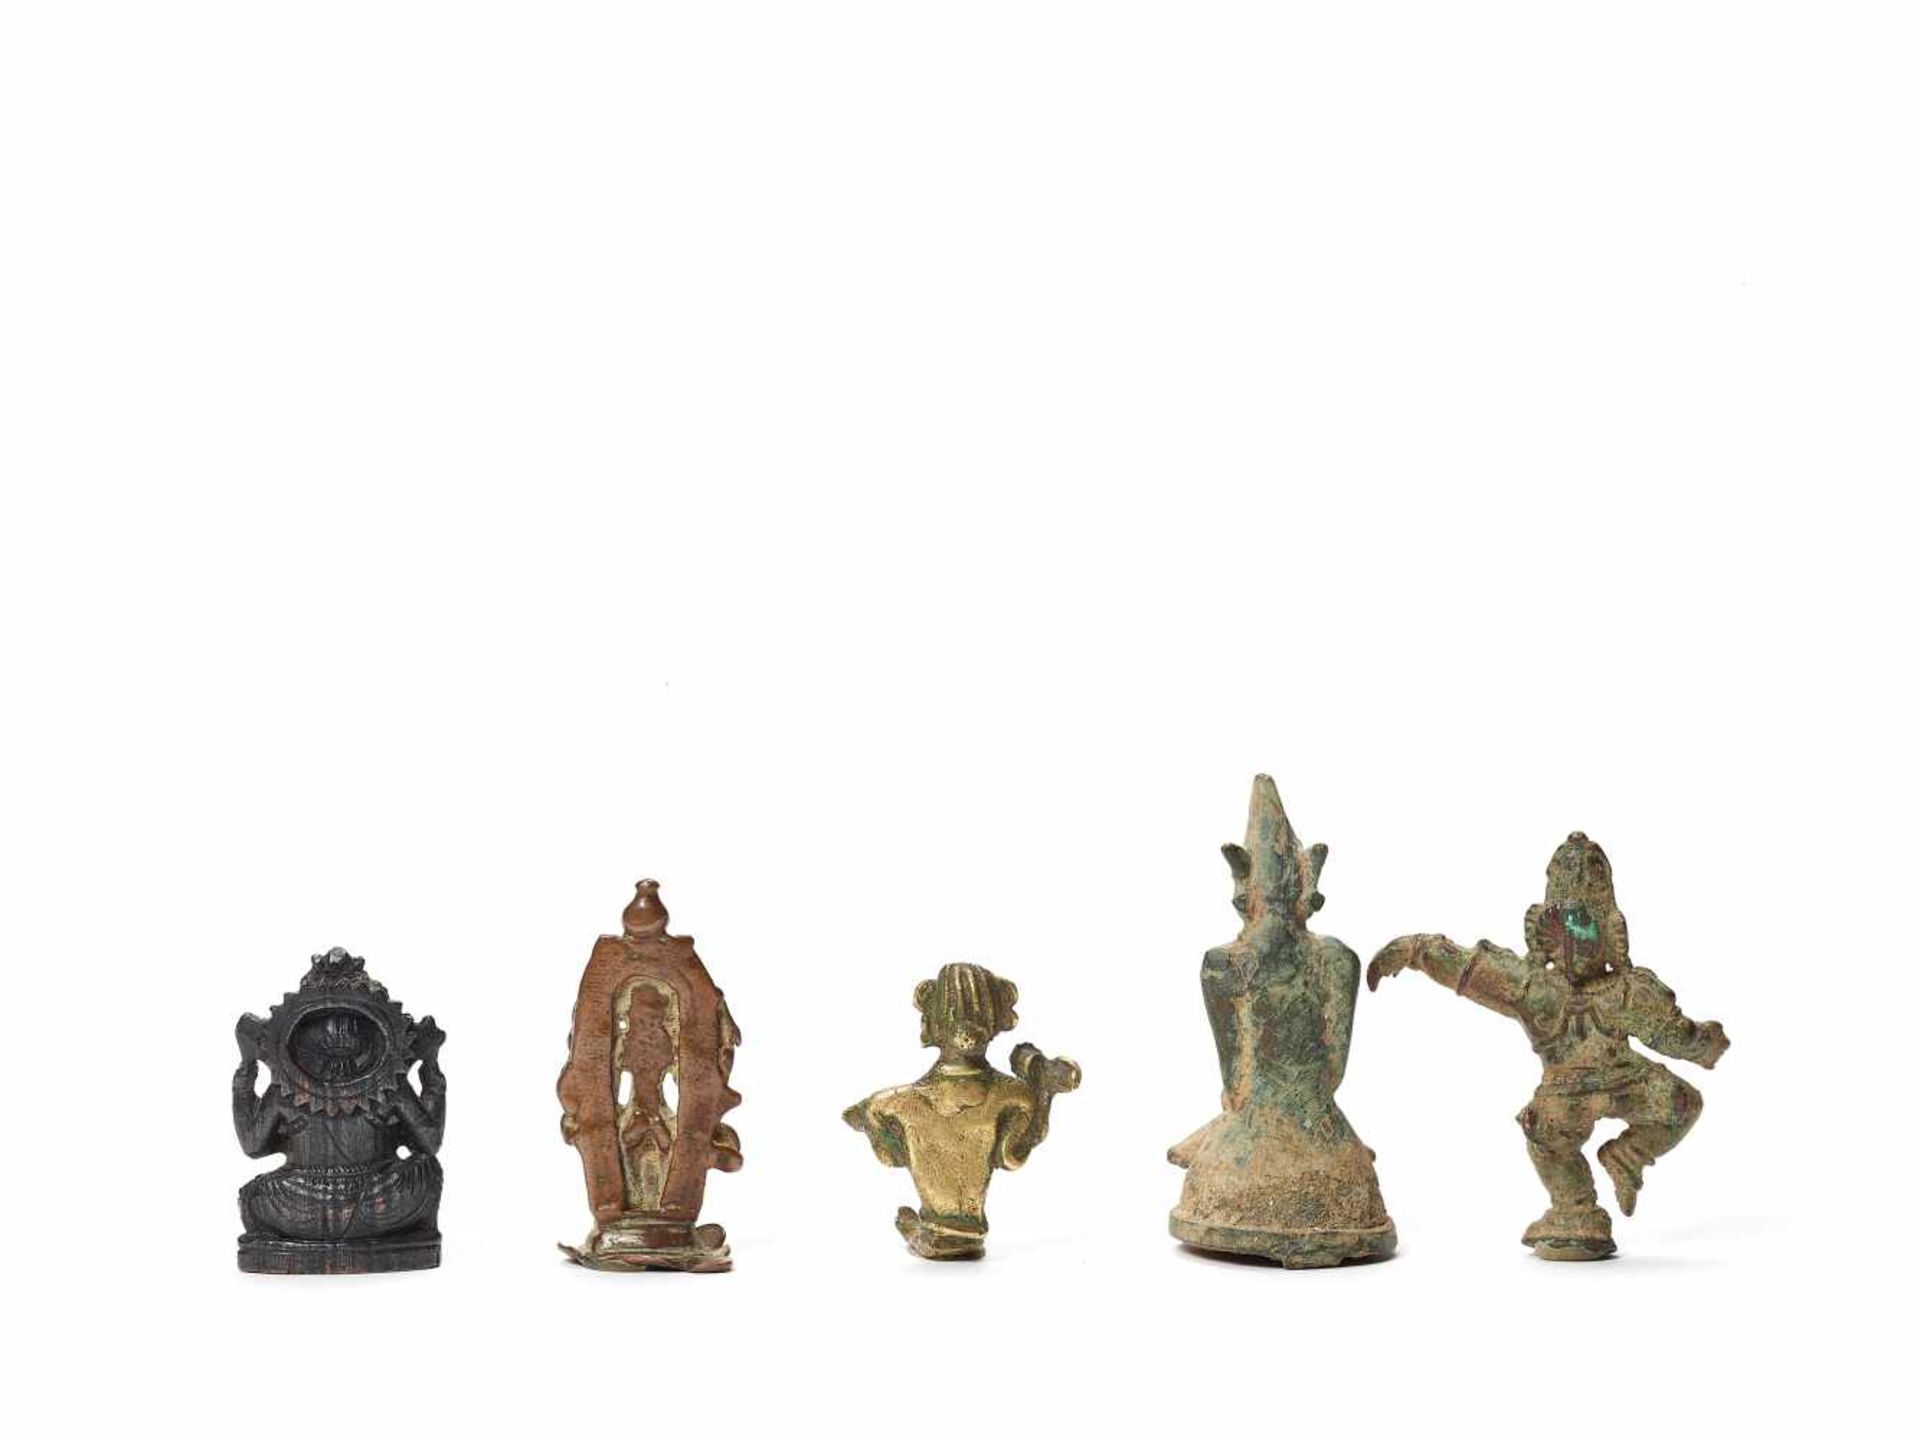 FIVE SMALL BRONZE FIGURES OF DEITIESBronzeIndia and Southeast Asia, 17th to 19th century, possibly - Image 2 of 2